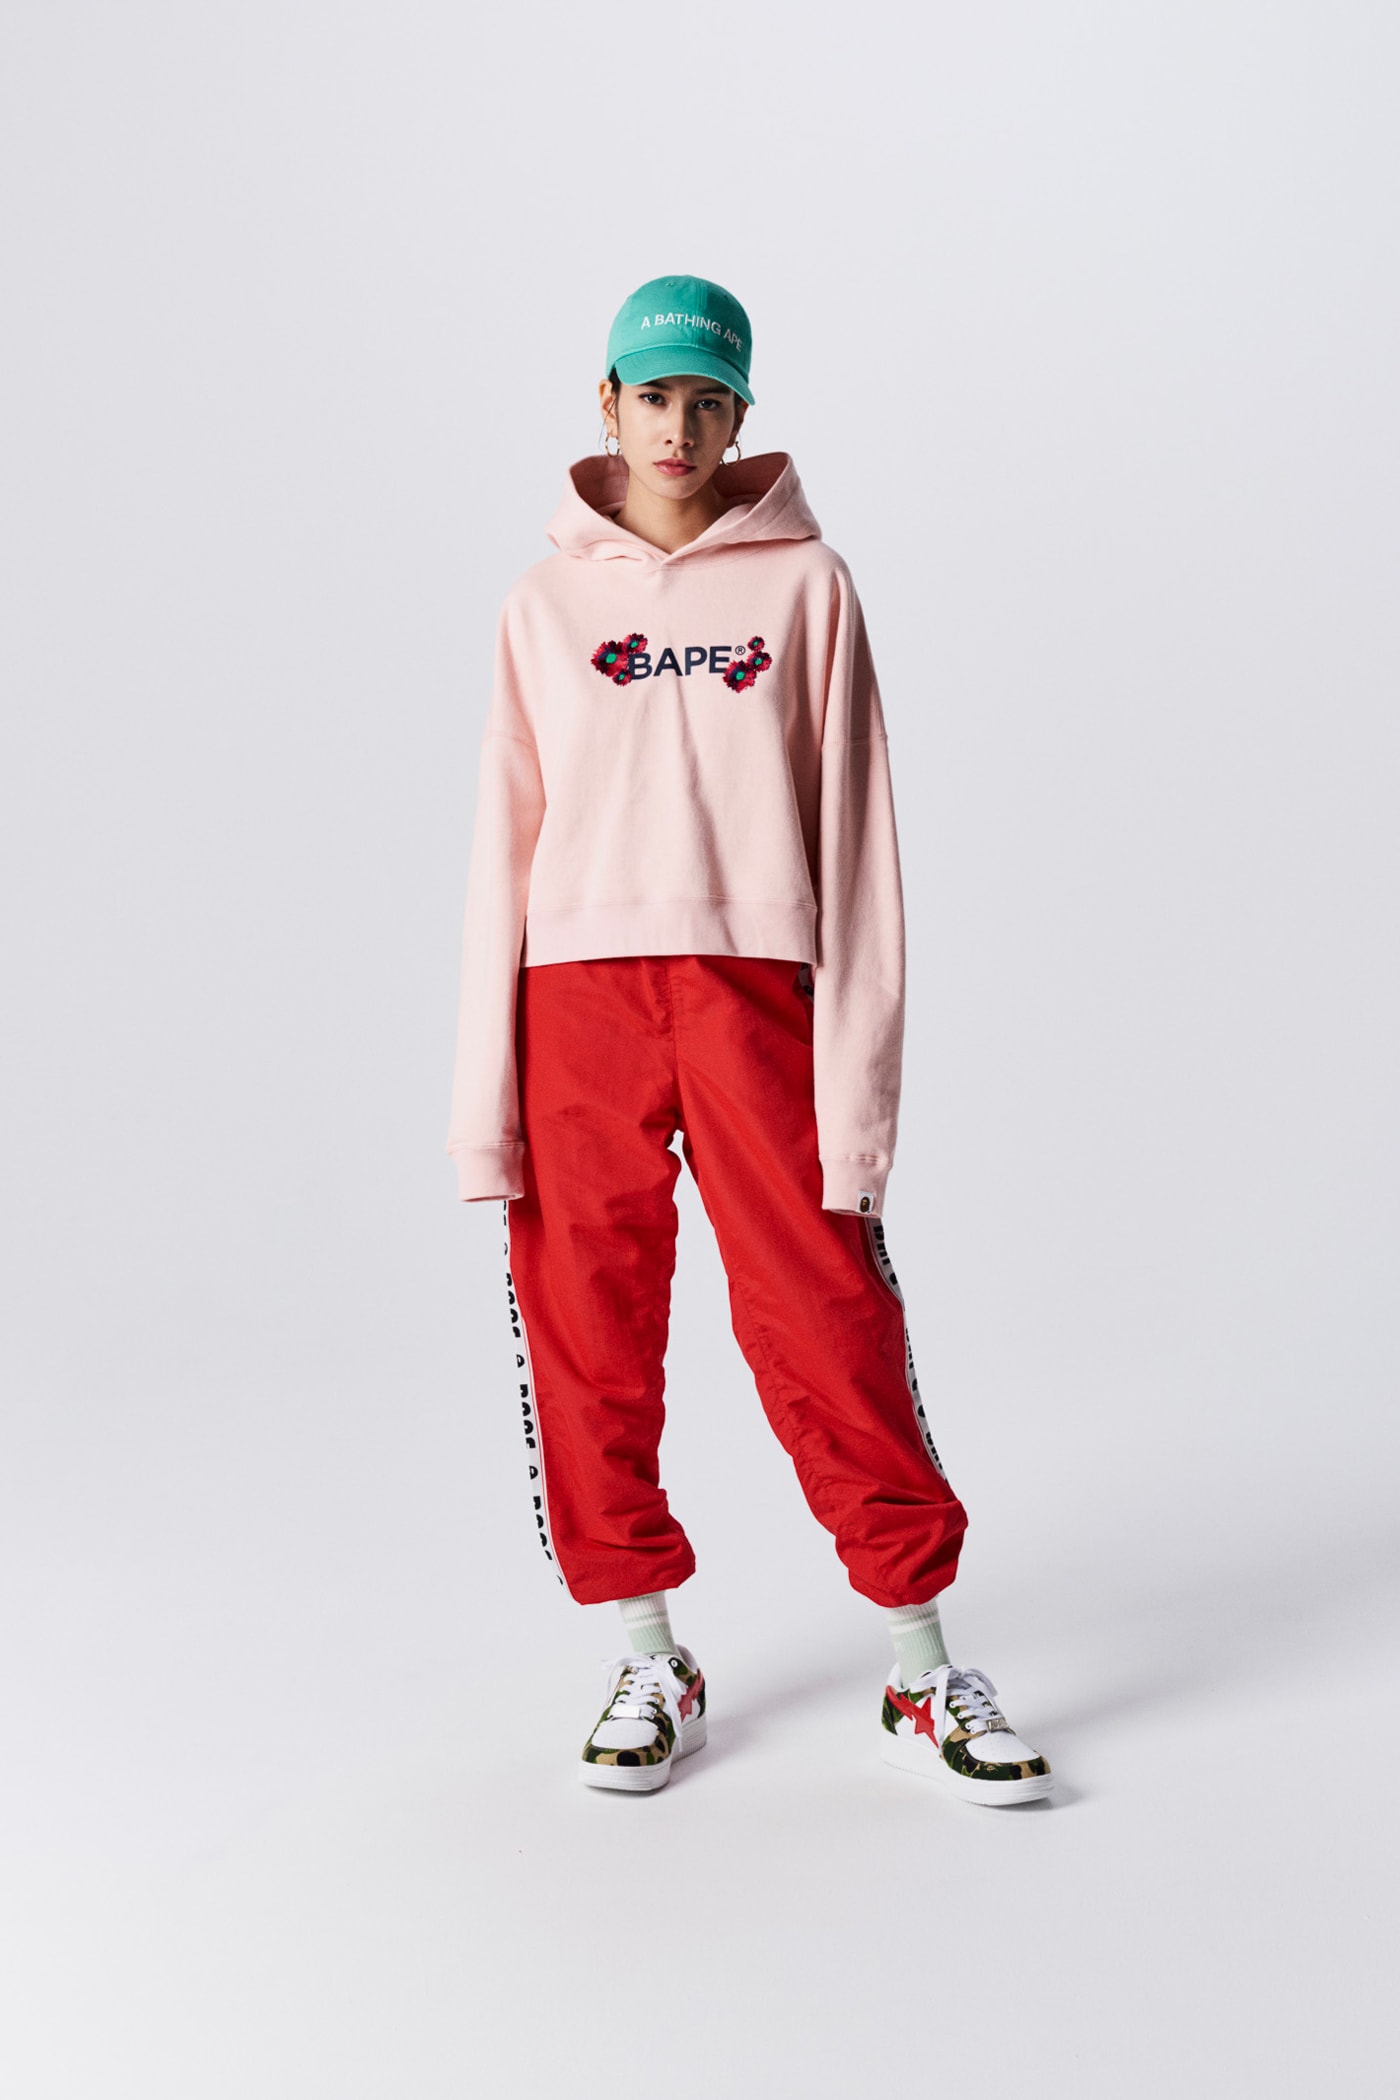 A Bathing Ape Spring Summer 2019 Collection Lookbook Hoodie Pink Pants Red